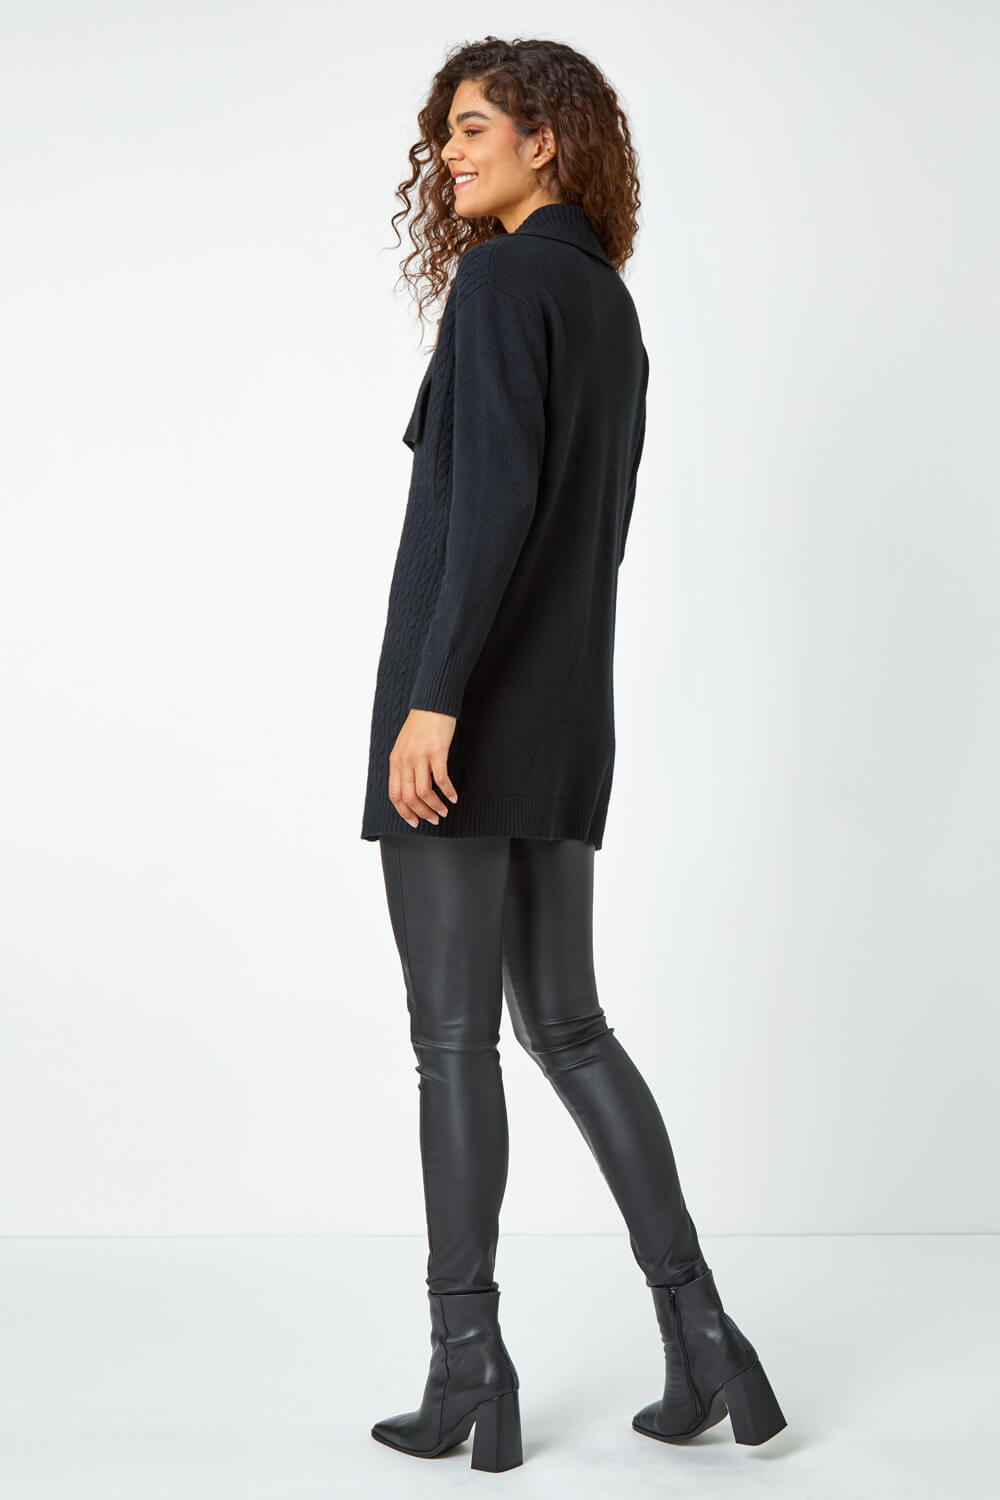 Black Longline Collared Cable Knit Cardigan, Image 3 of 5